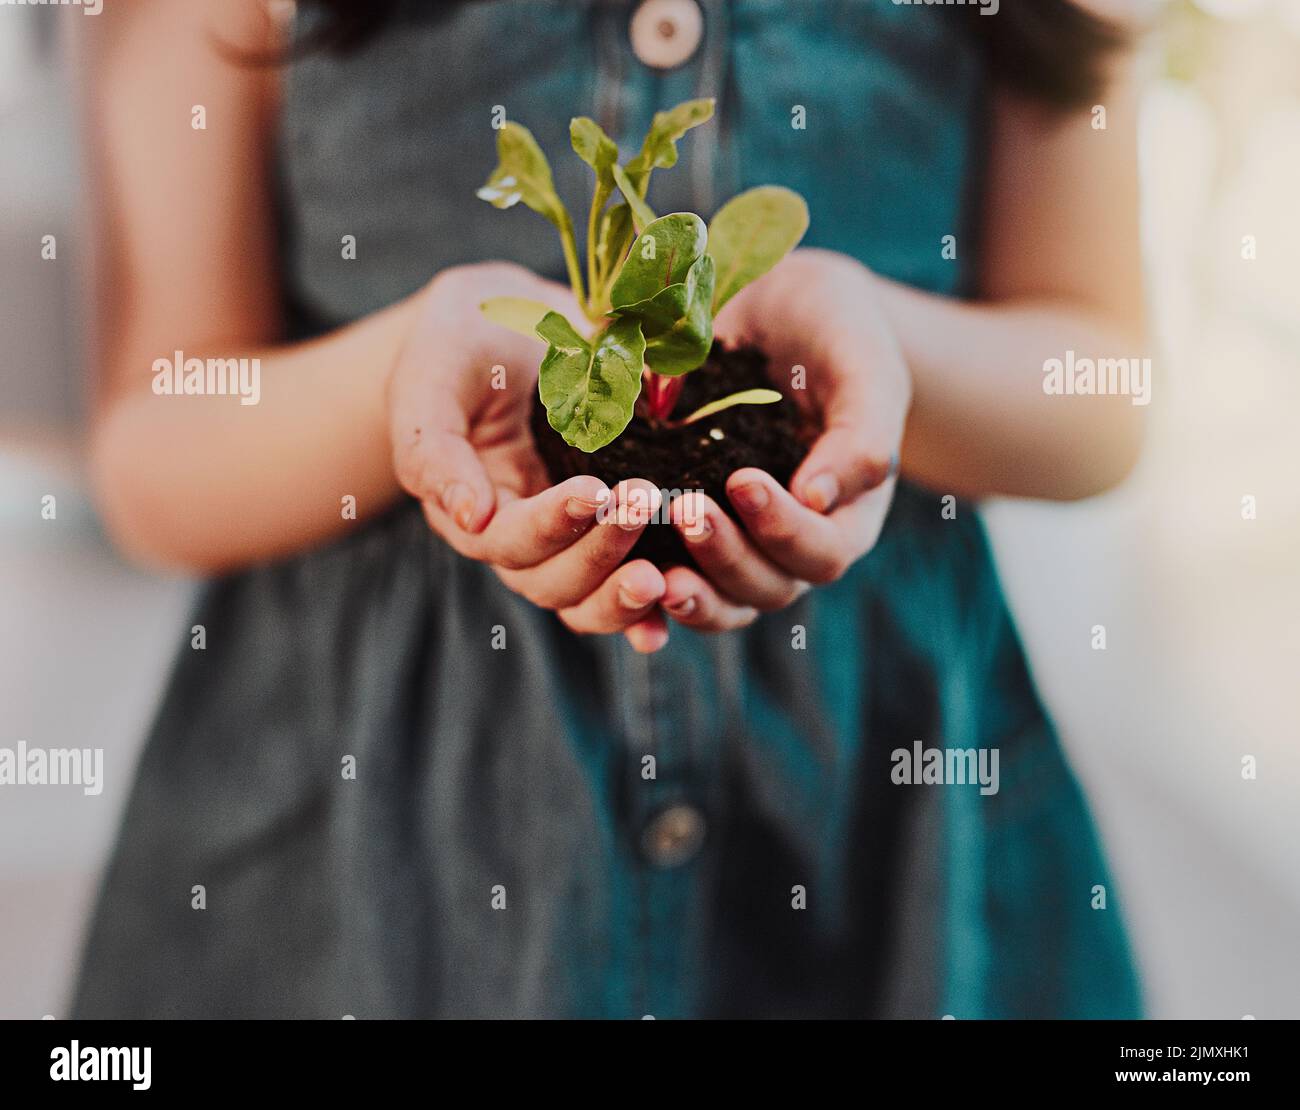 Learn to nurture the growth of nature. an unrecognizable young girl holding a plant growing out of soil while standing indoors. Stock Photo